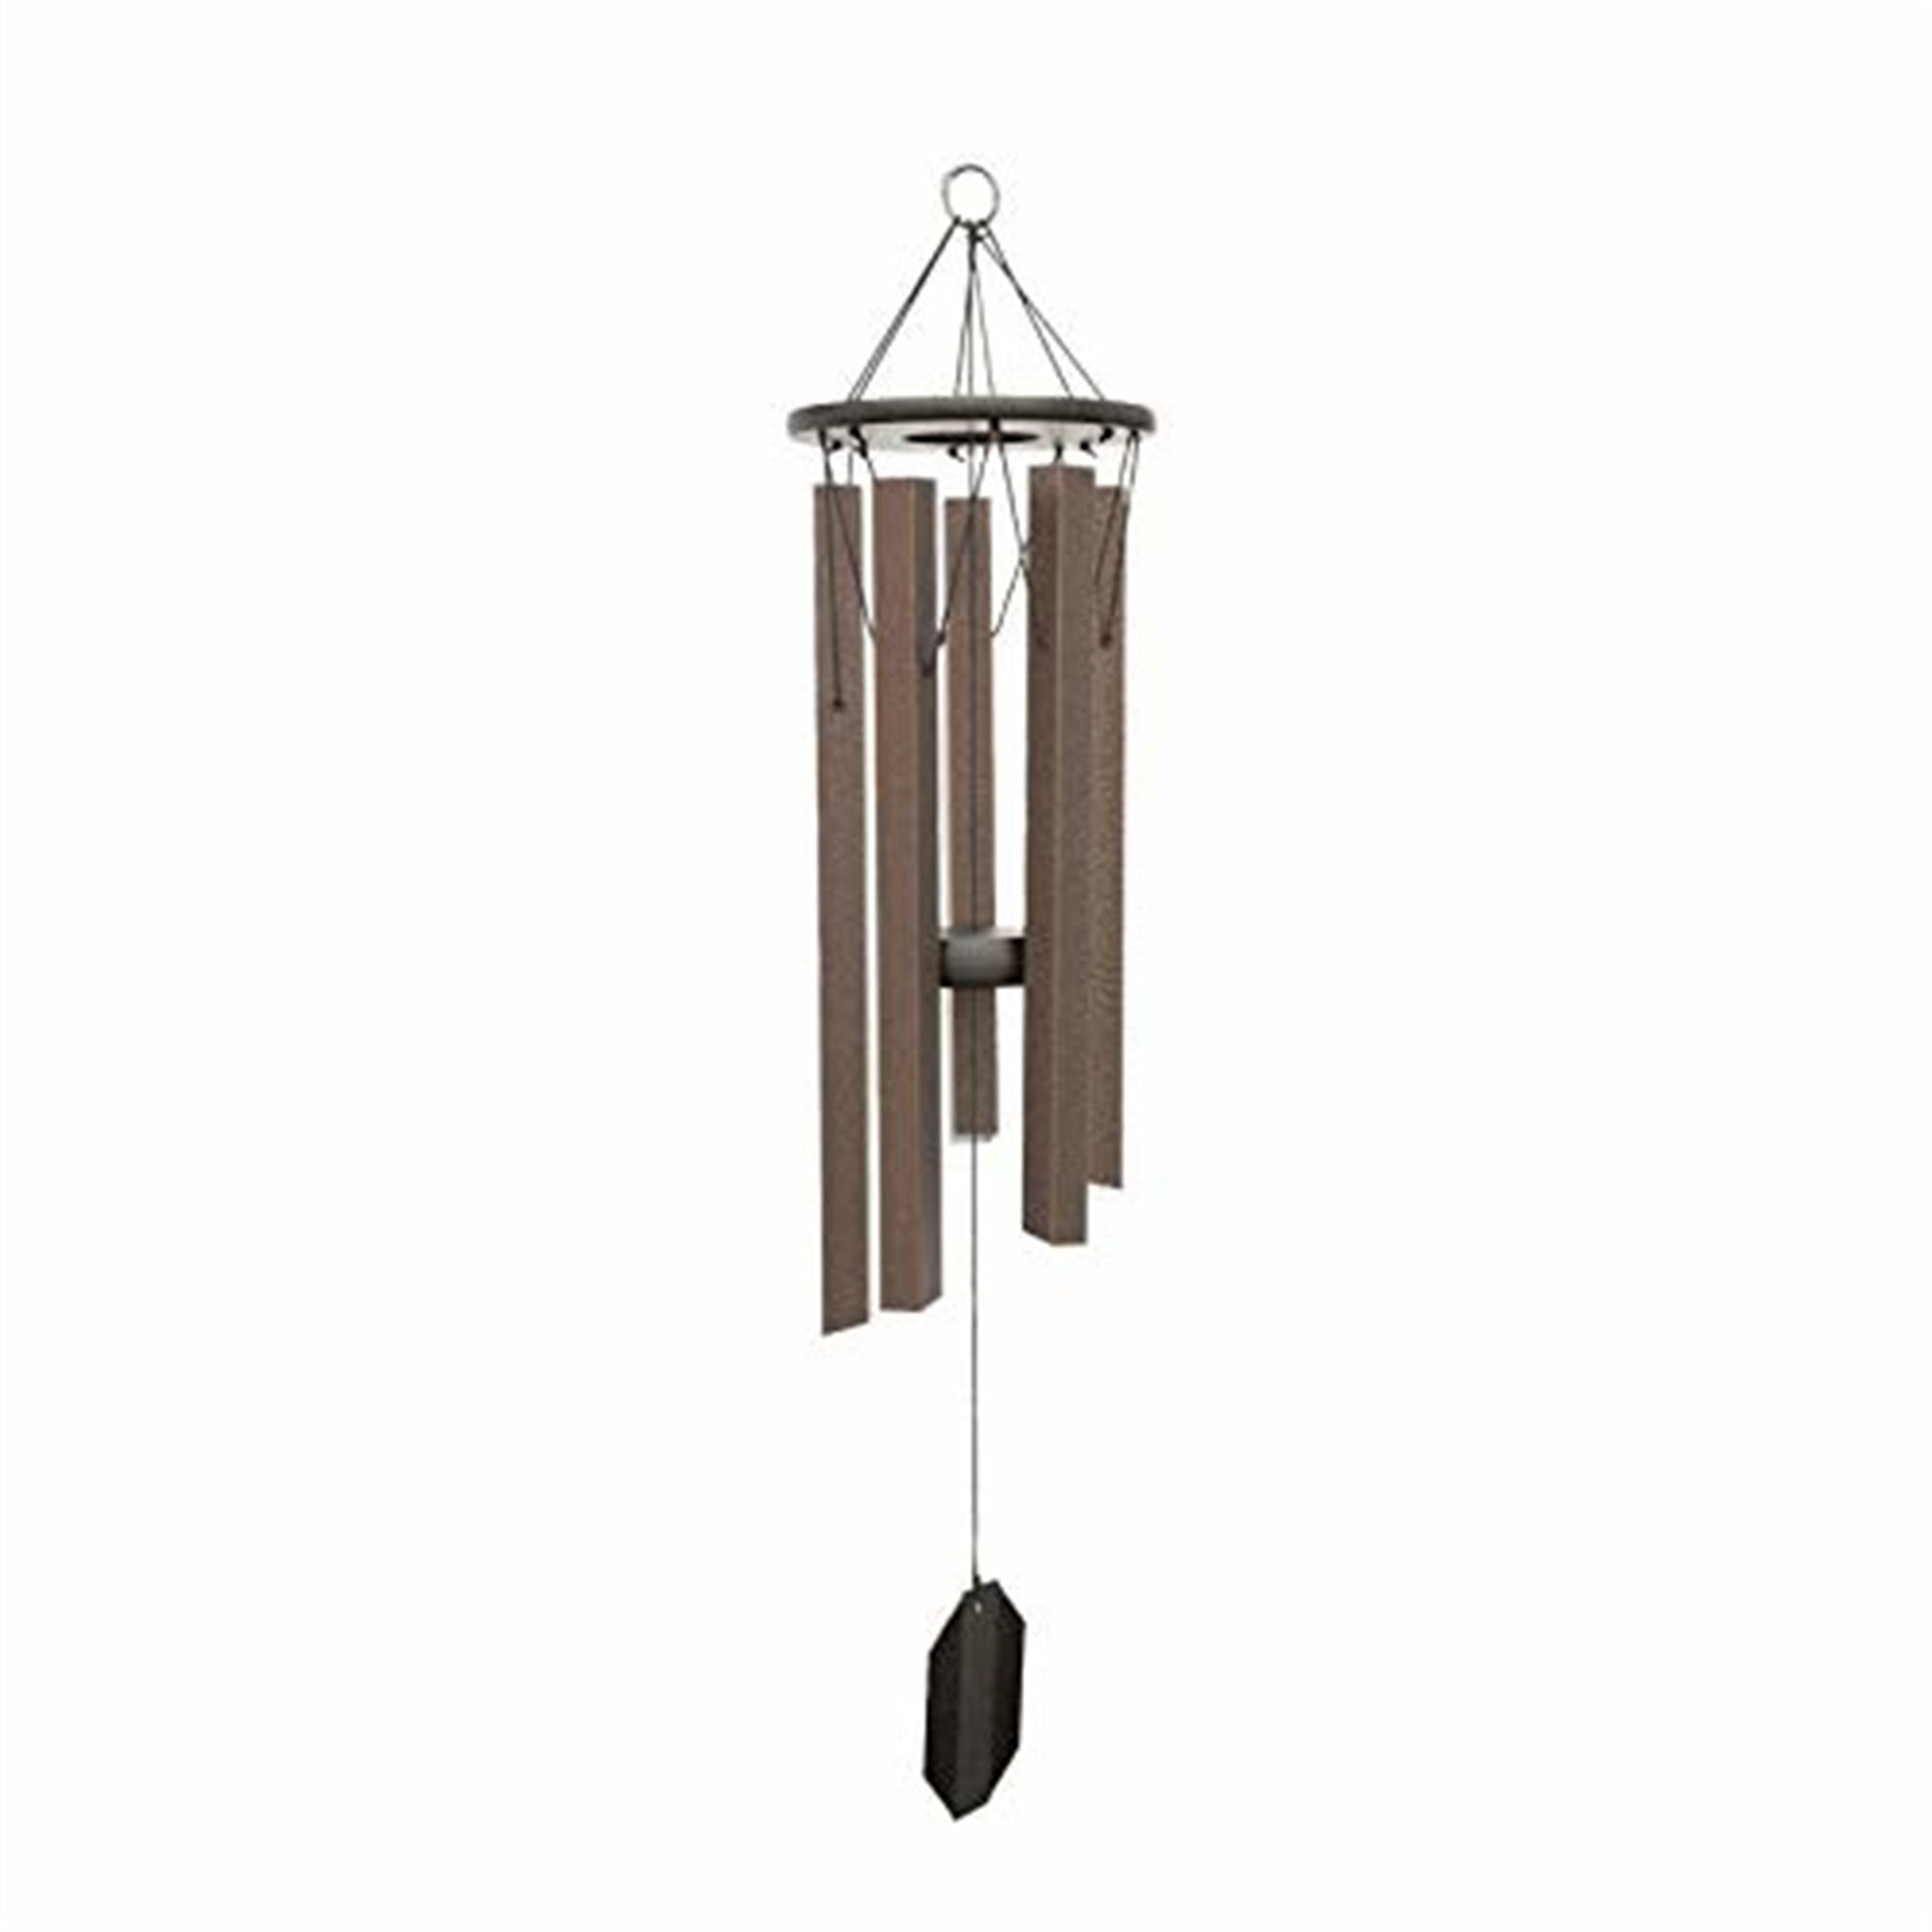 Lambright Chimes Aqua Tune Wind Chime - Amish Handcrafted, 51"